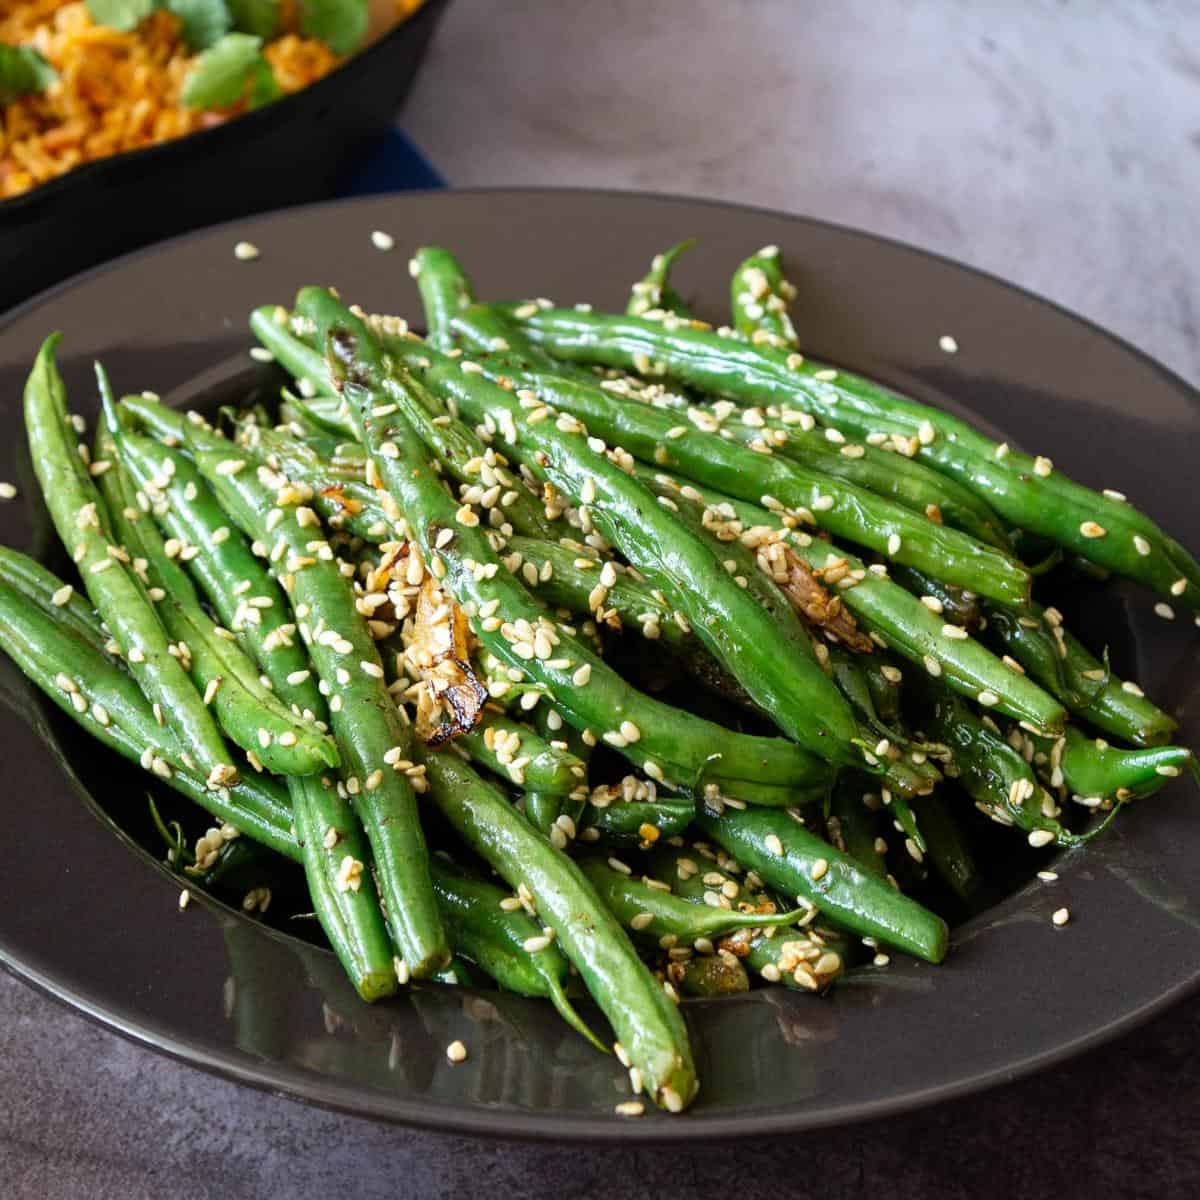 A plate with green beans and sesame seeds